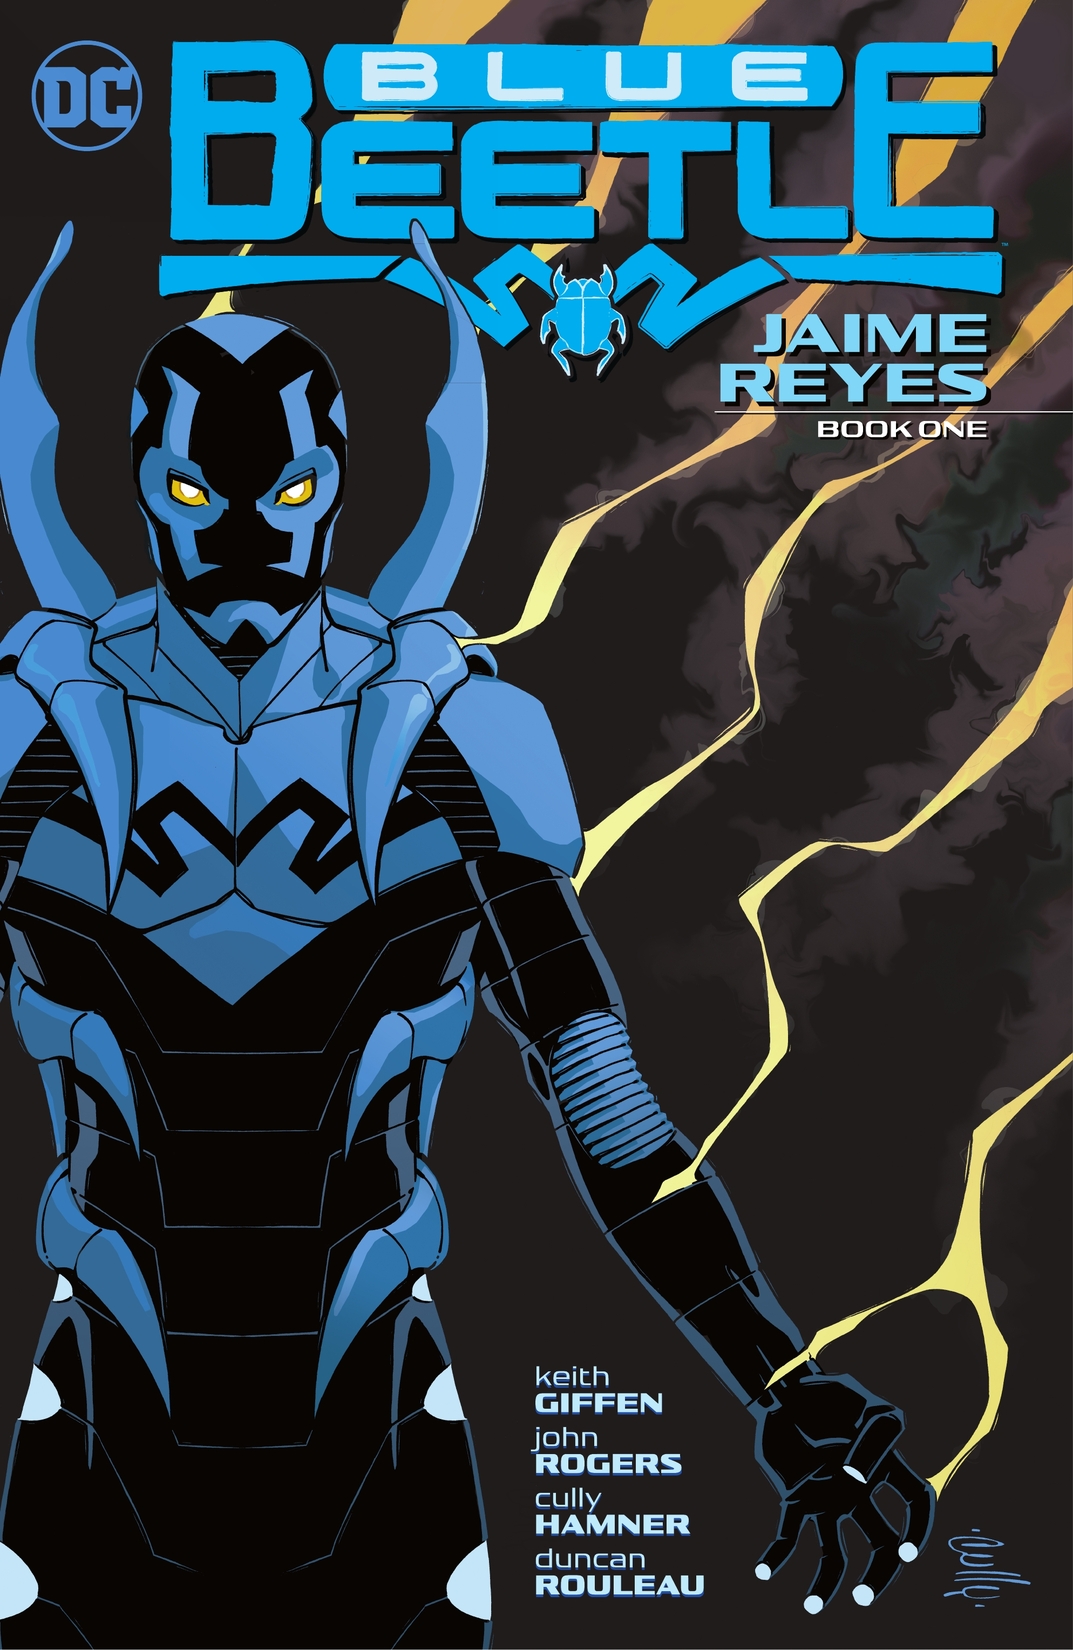 Blue Beetle: Jaime Reyes Book One preview images